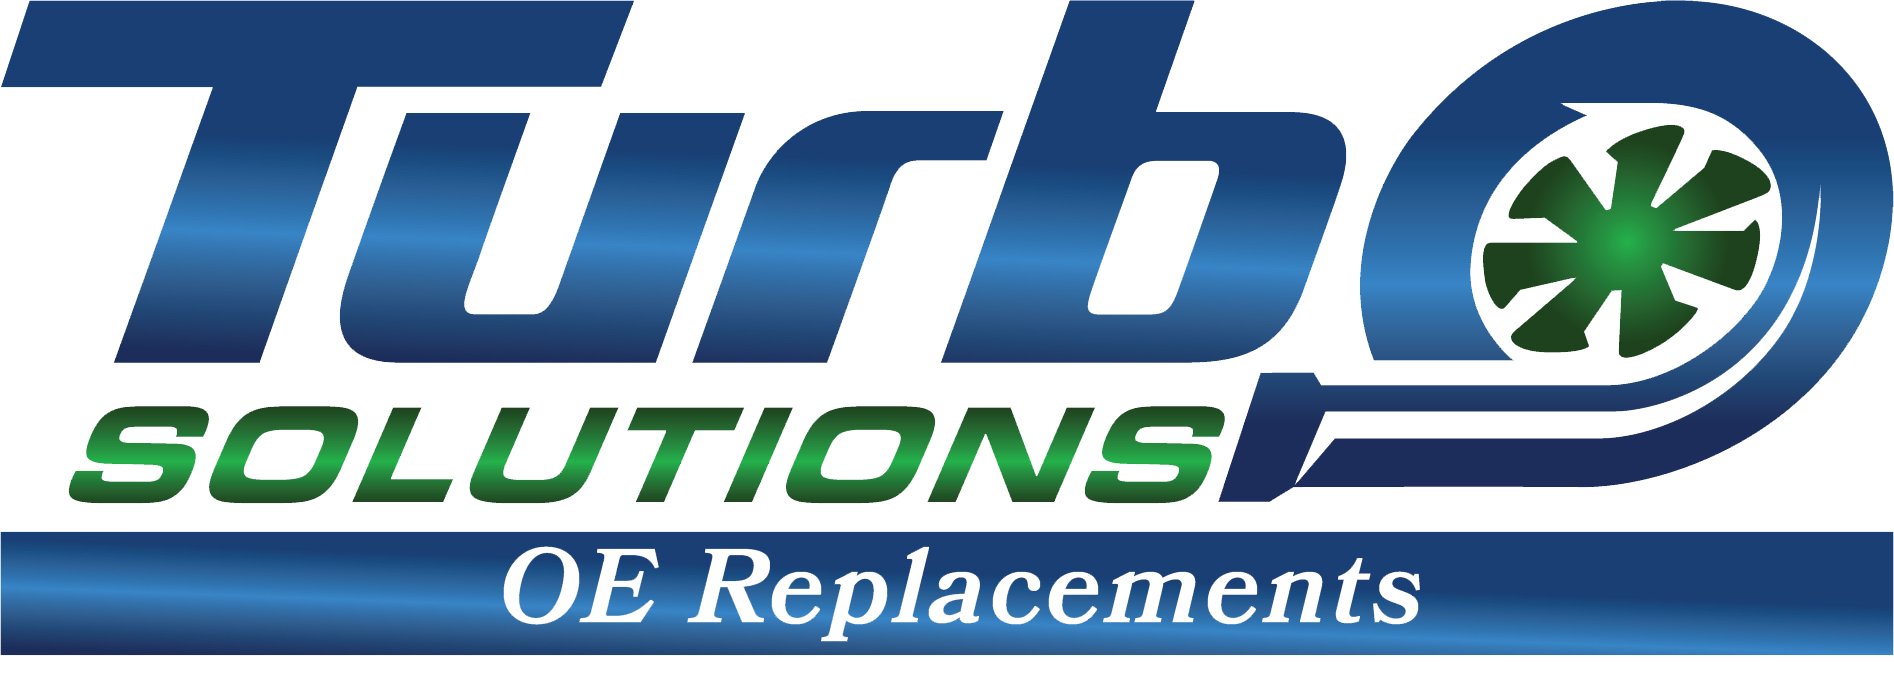 Turbo Solutions OE Replacements Logo_NEW 2021.png